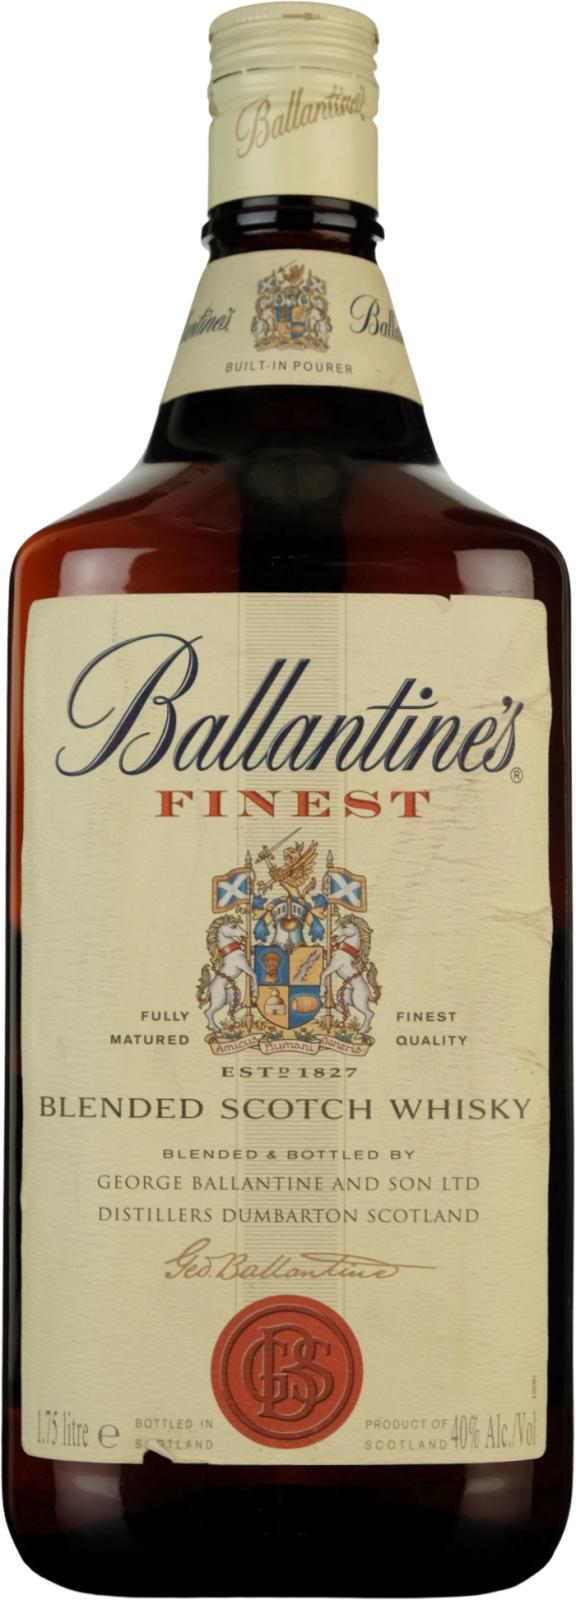 Ballantine's Finest - Value and price information - Whiskystats